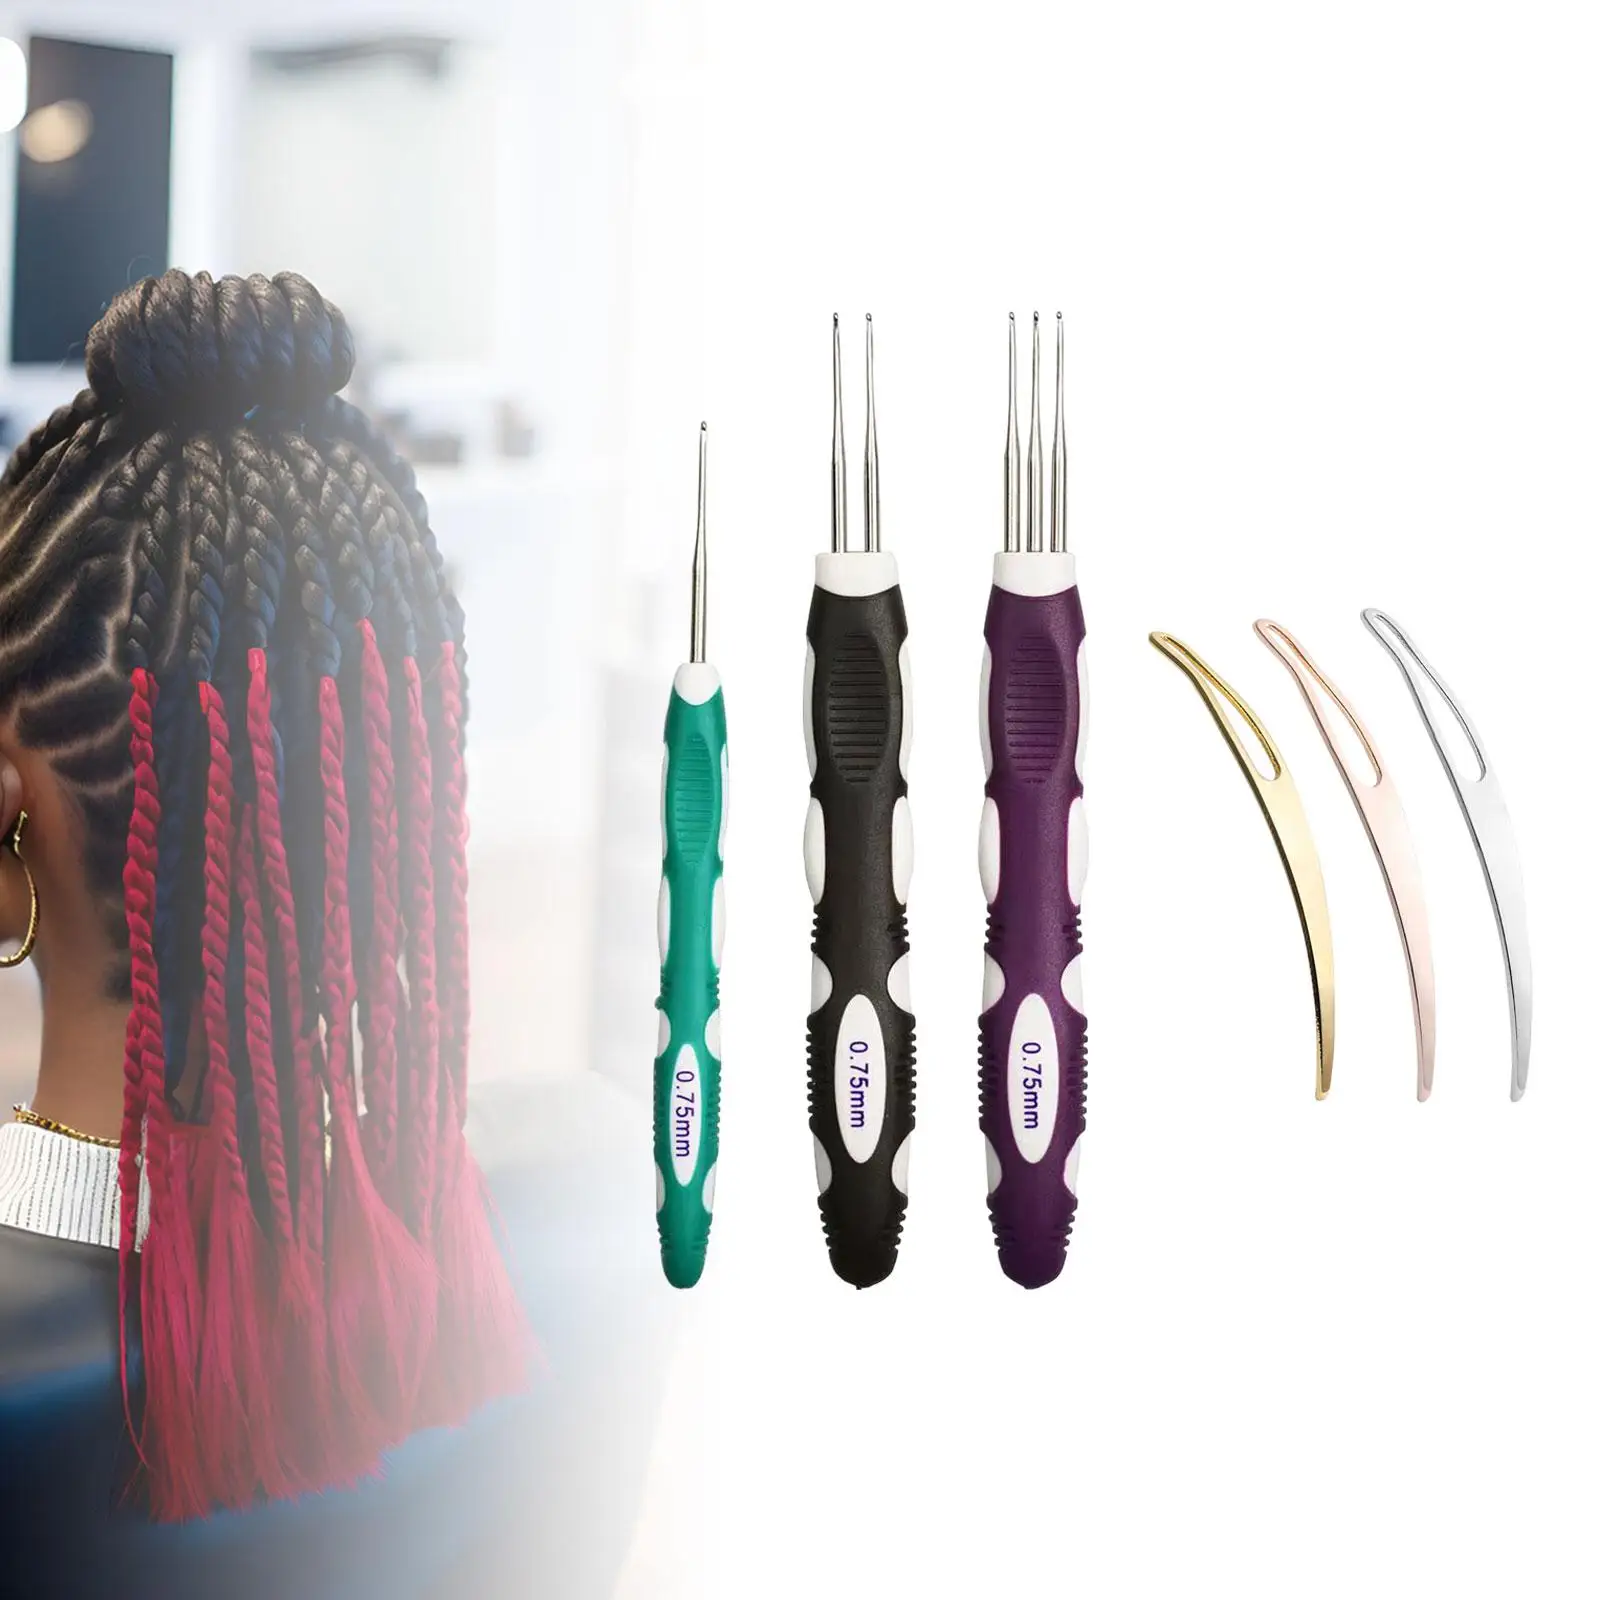 6x Dreadlock Crochet Hook with Hair Locking Tool Salon 0.75mm Hair Extensions Tool Practical Include 1 Hook, 2 Hook and 3 Hooks